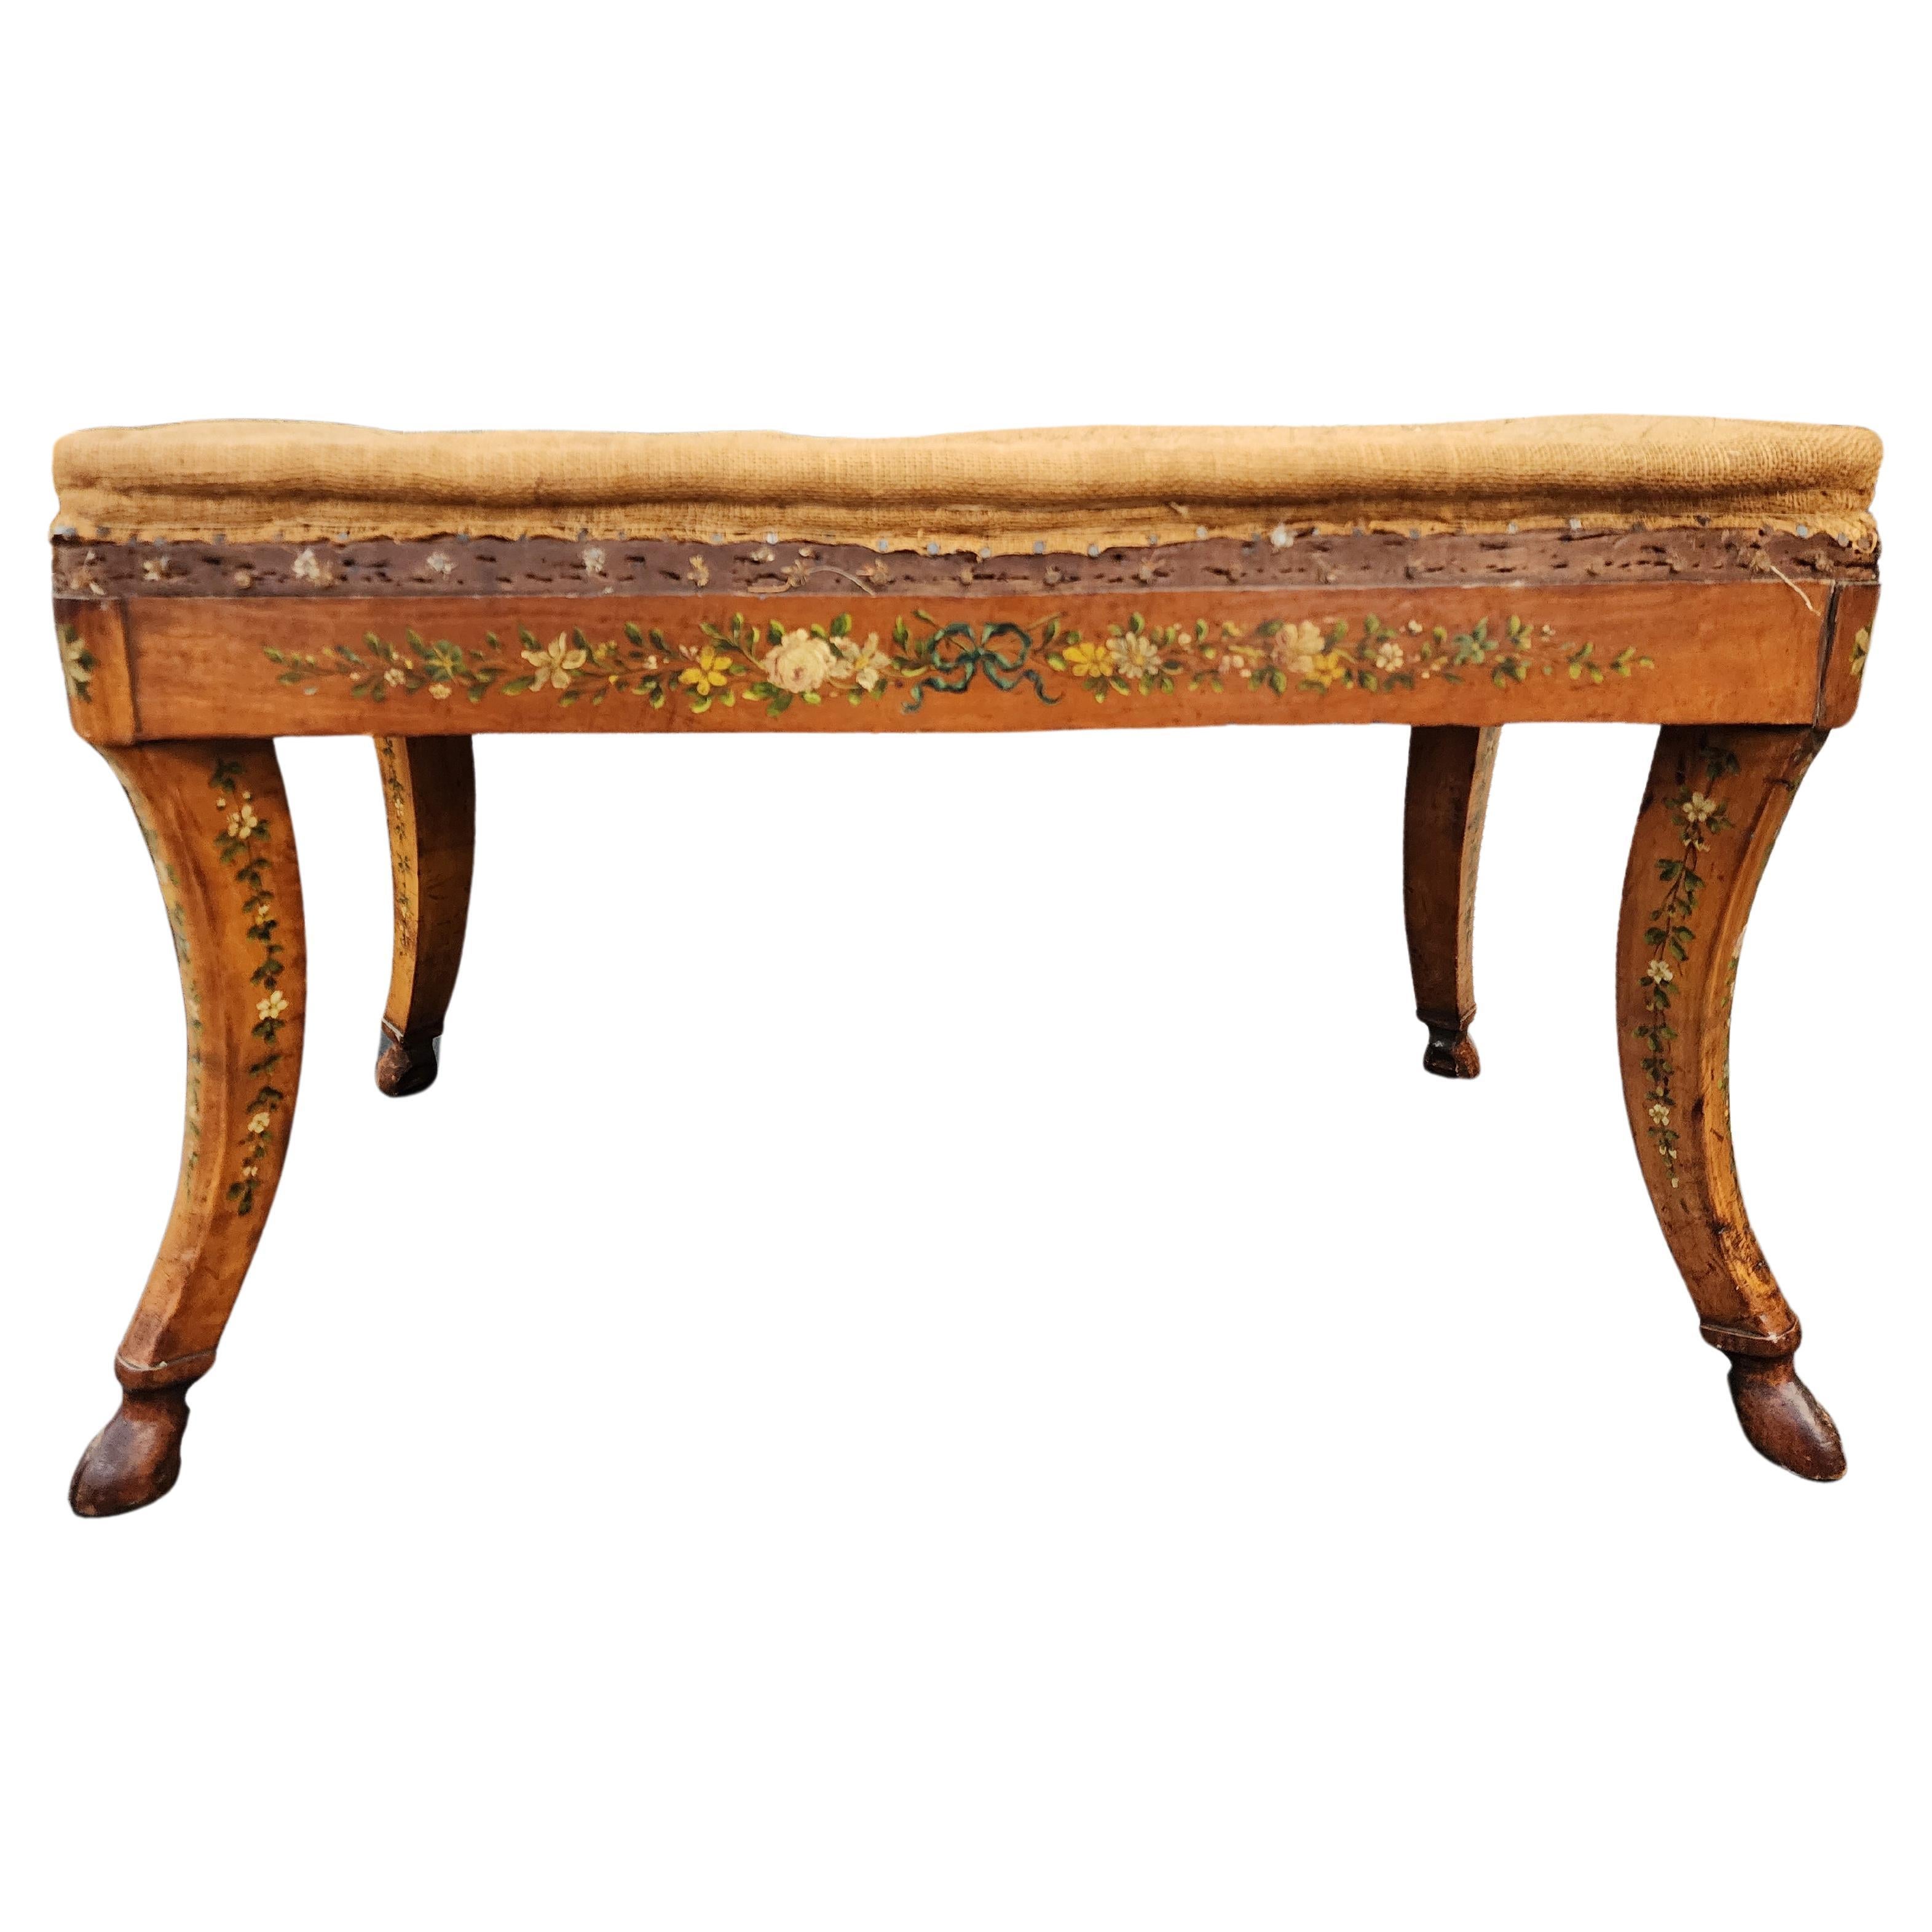 Mauve period, Ceylon satinwood bench with saber legs, carved hoofed feet and delicately painted floral accents. This Gilded age satinwood bench from the late 19th century exudes an elegance that reflects the tastes of the era. The harmonious blend